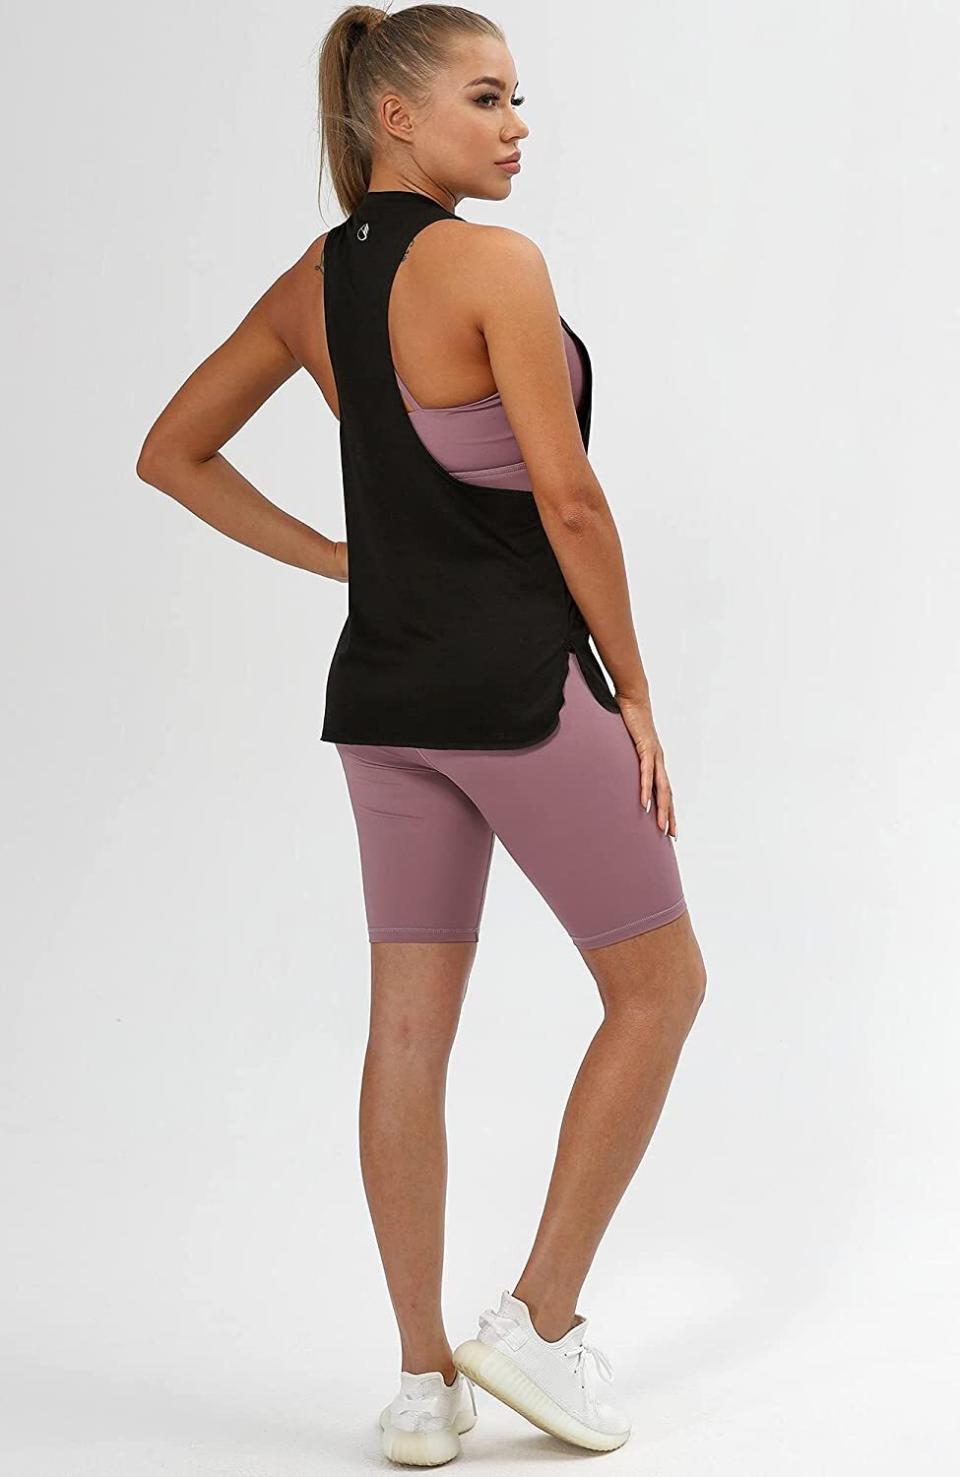 You can show off that cute sports bra you love when you wear this top.<br /><br /><strong>Promising review:</strong> "I teach fitness classes multiple times per week. This is my go-to top! I have it in six colors. I love the cut on the arm opening up to the neck. It really flatters the shoulder muscles. Also, the arm opening is low enough to show off a cute sports bra while also being loose enough to maintain appropriateness while 'working.' They wash and dry really well too. It fits true to size." &mdash; <a href="https://www.amazon.com/gp/customer-reviews/R2B1RKOXY2F4TE?&amp;linkCode=ll2&amp;tag=huffpost-bfsyndication-20&amp;linkId=949708fca83ce6b5aecb2c84f02f7b3f&amp;language=en_US&amp;ref_=as_li_ss_tl" target="_blank" rel="nofollow noopener noreferrer" data-skimlinks-tracking="4978705" data-vars-affiliate="Amazon" data-vars-href="https://www.amazon.com/gp/customer-reviews/R2B1RKOXY2F4TE?tag=bfabby-20&amp;ascsubtag=4978705%2C13%2C21%2Cmobile_web%2C0%2C0%2C0" data-vars-keywords="fast fashion" data-vars-link-id="0" data-vars-price="">Ticket81</a><br /><br /><a href="https://www.amazon.com/icyzone-Workout-Tank-Tops-Women/dp/B0753GBMVM?&amp;linkCode=ll1&amp;tag=huffpost-bfsyndication-20&amp;linkId=3d17d693646cf4d02595a49eabc40928&amp;language=en_US&amp;ref_=as_li_ss_tl" target="_blank" rel="noopener noreferrer"><strong>Price: $23.79+ (available in XS-XL and in 10 colors and varieties)</strong></a>